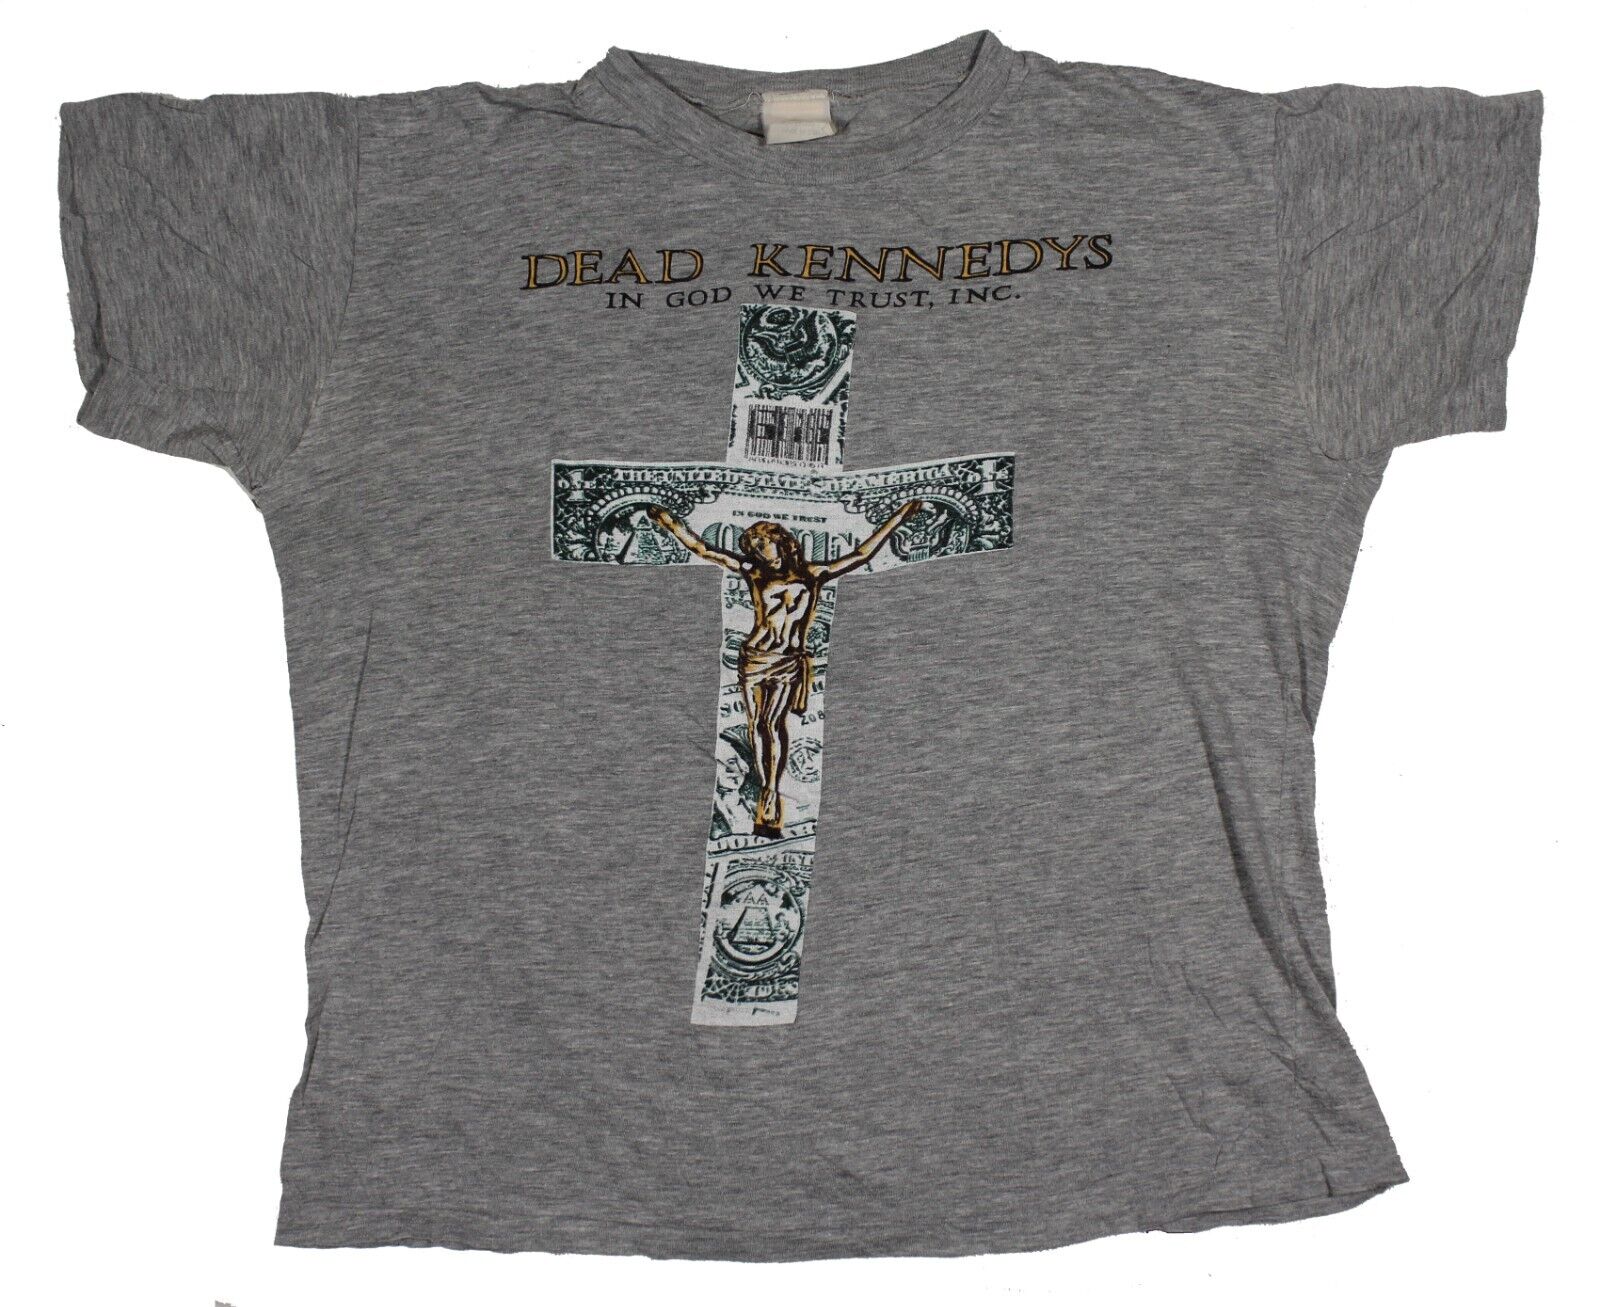 Dead Kennedys - In God We Trust Inc Rare Vintage T-Shirt